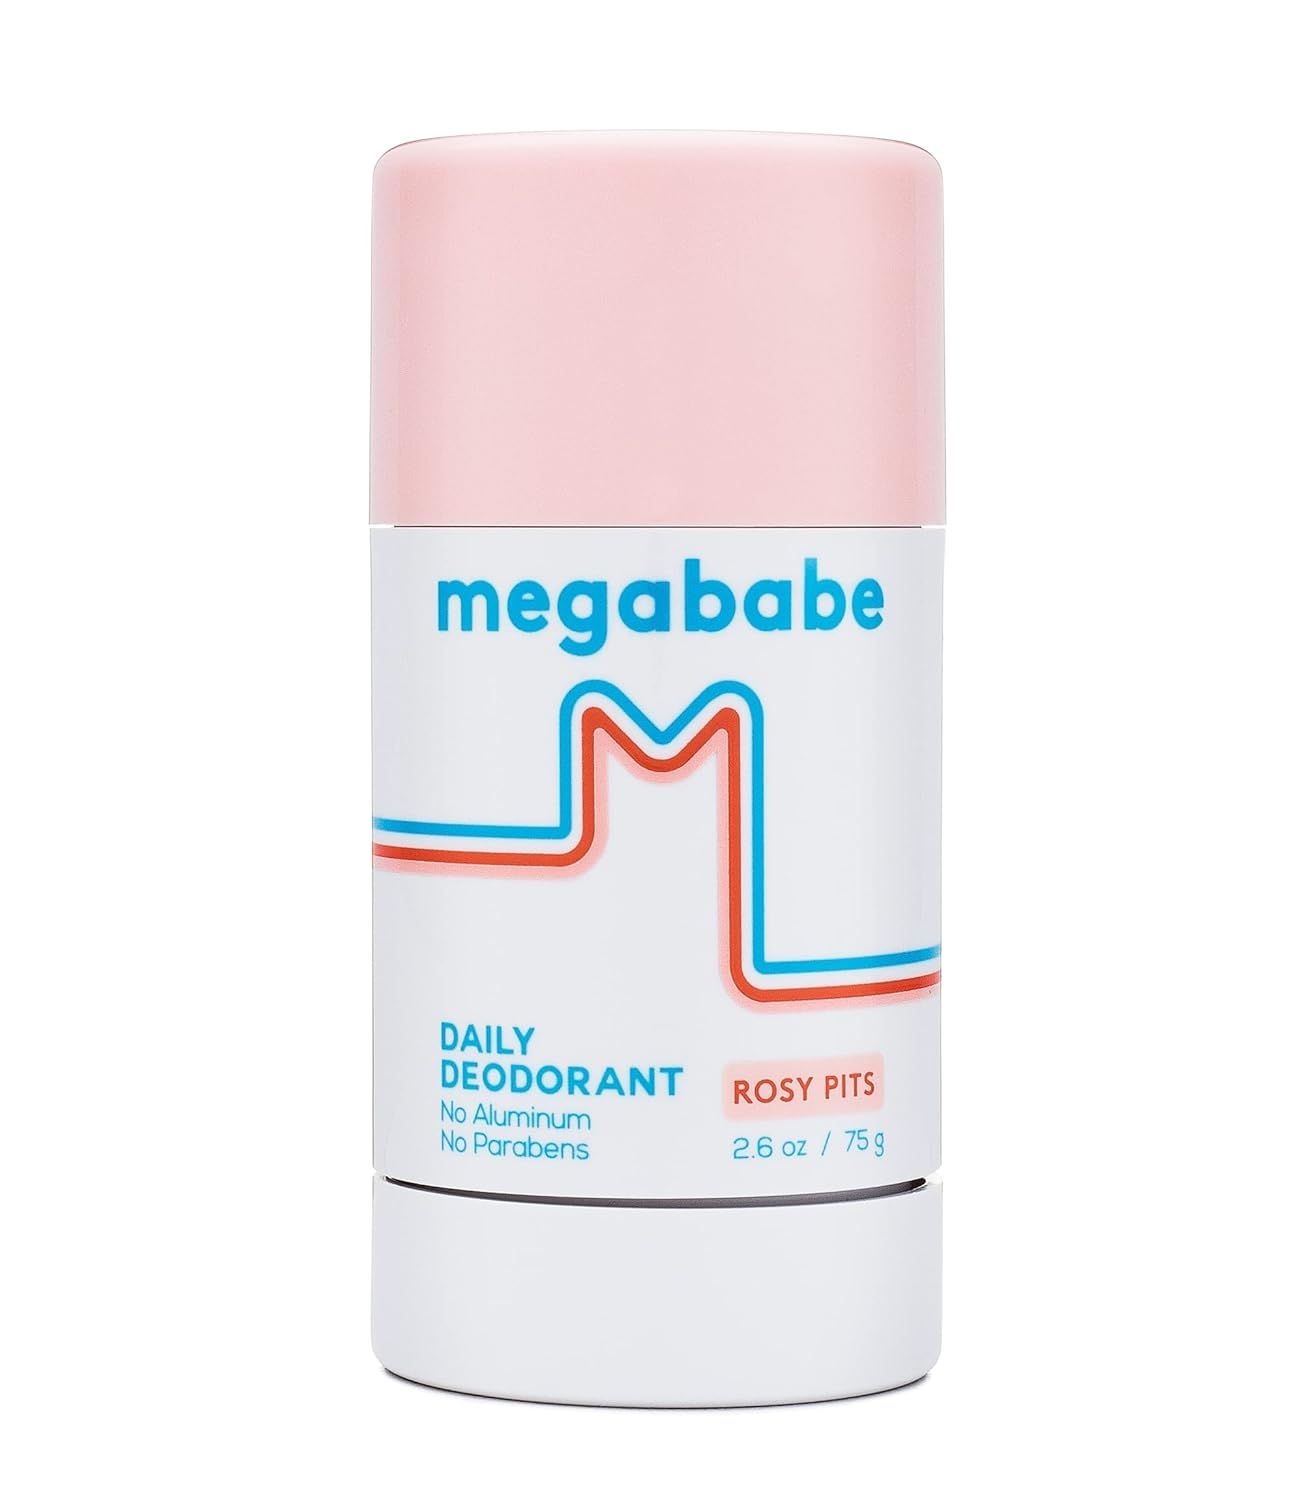 Megababe Daily Deodorant - Rosy Pits | Aluminum-Free, Clear & Clean | 2.6 oz | Amazon (US)